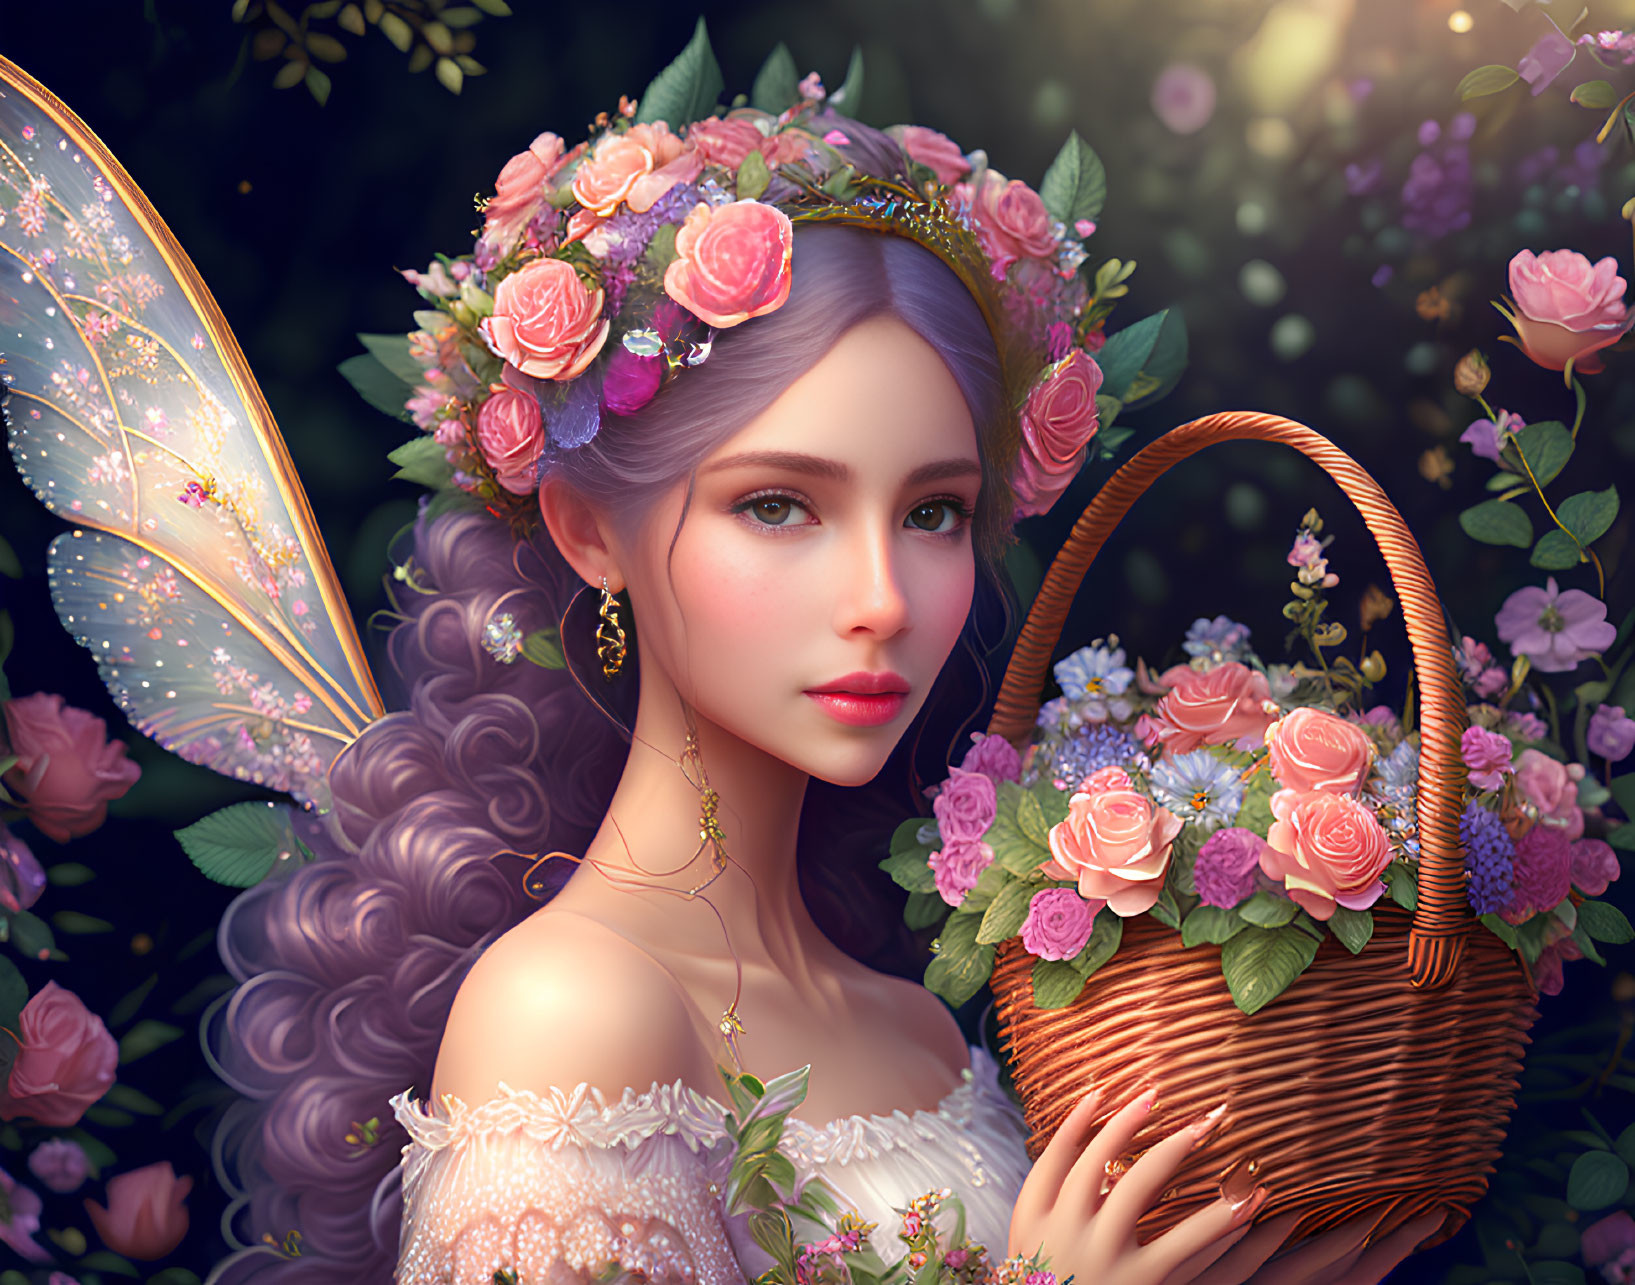 Purple-haired fairy with wings in floral garden holding roses basket